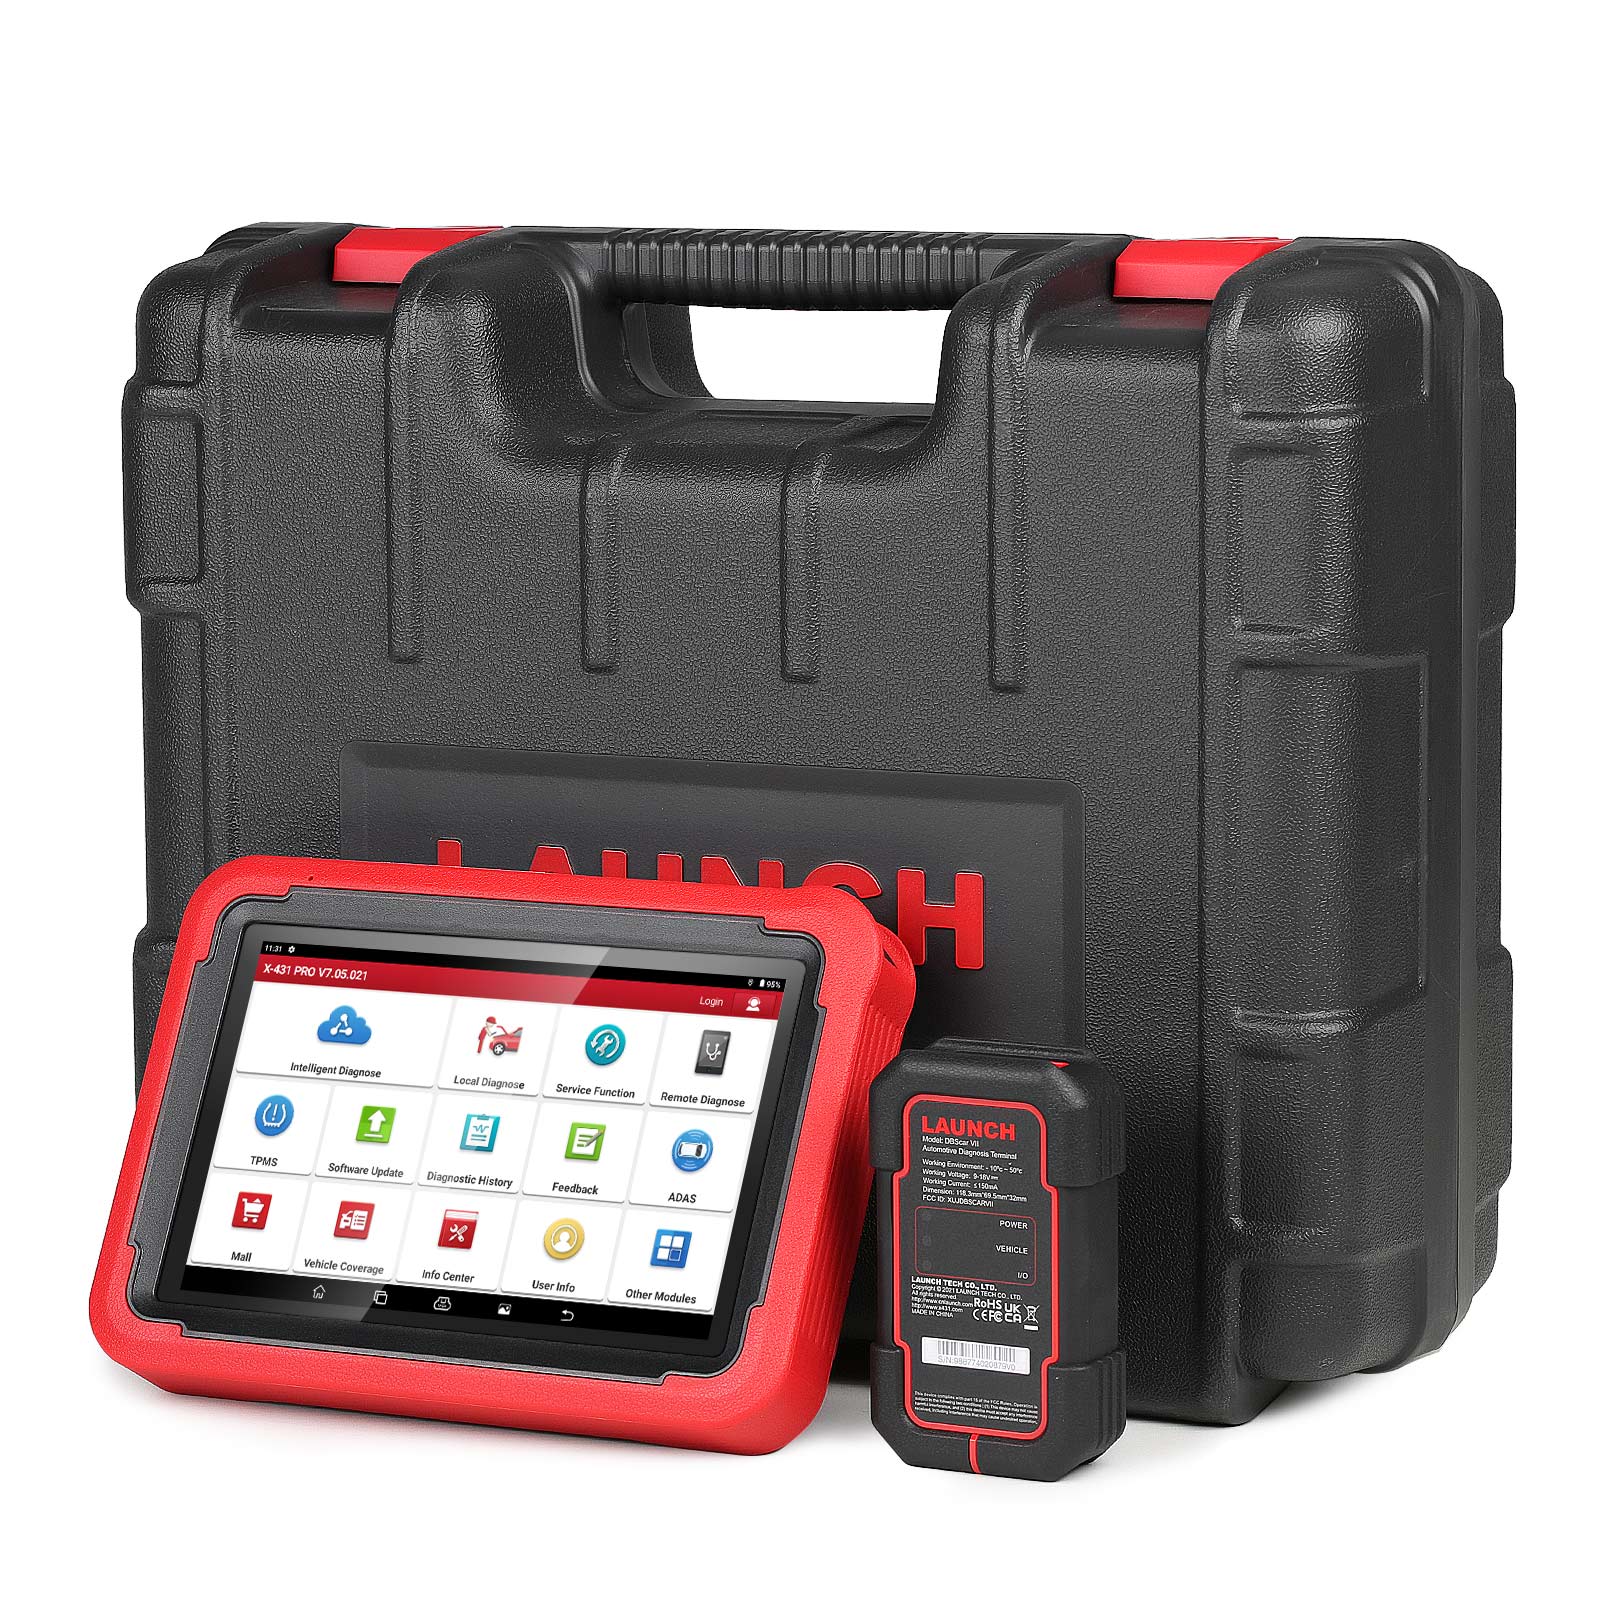 Launch X431 PROS V5.0 Car Scanner Diagnostic tool With DBScar VII connector  37 special functions